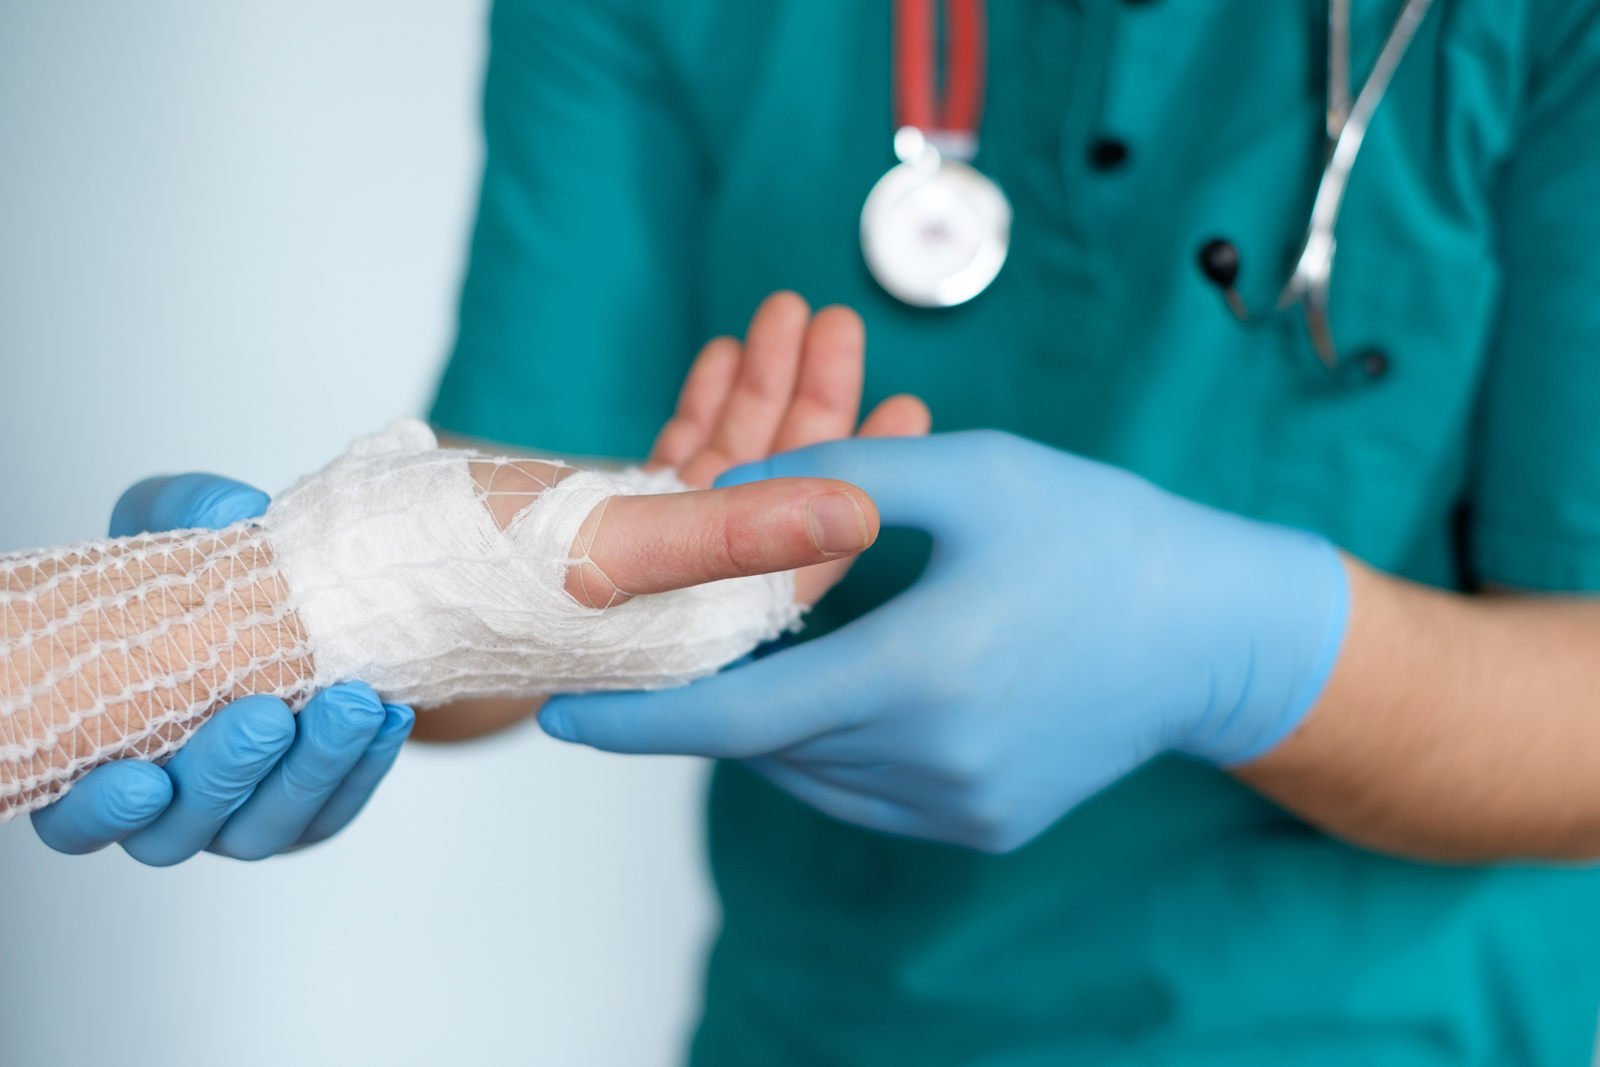 close up of doctor bandaging one hand after an accident